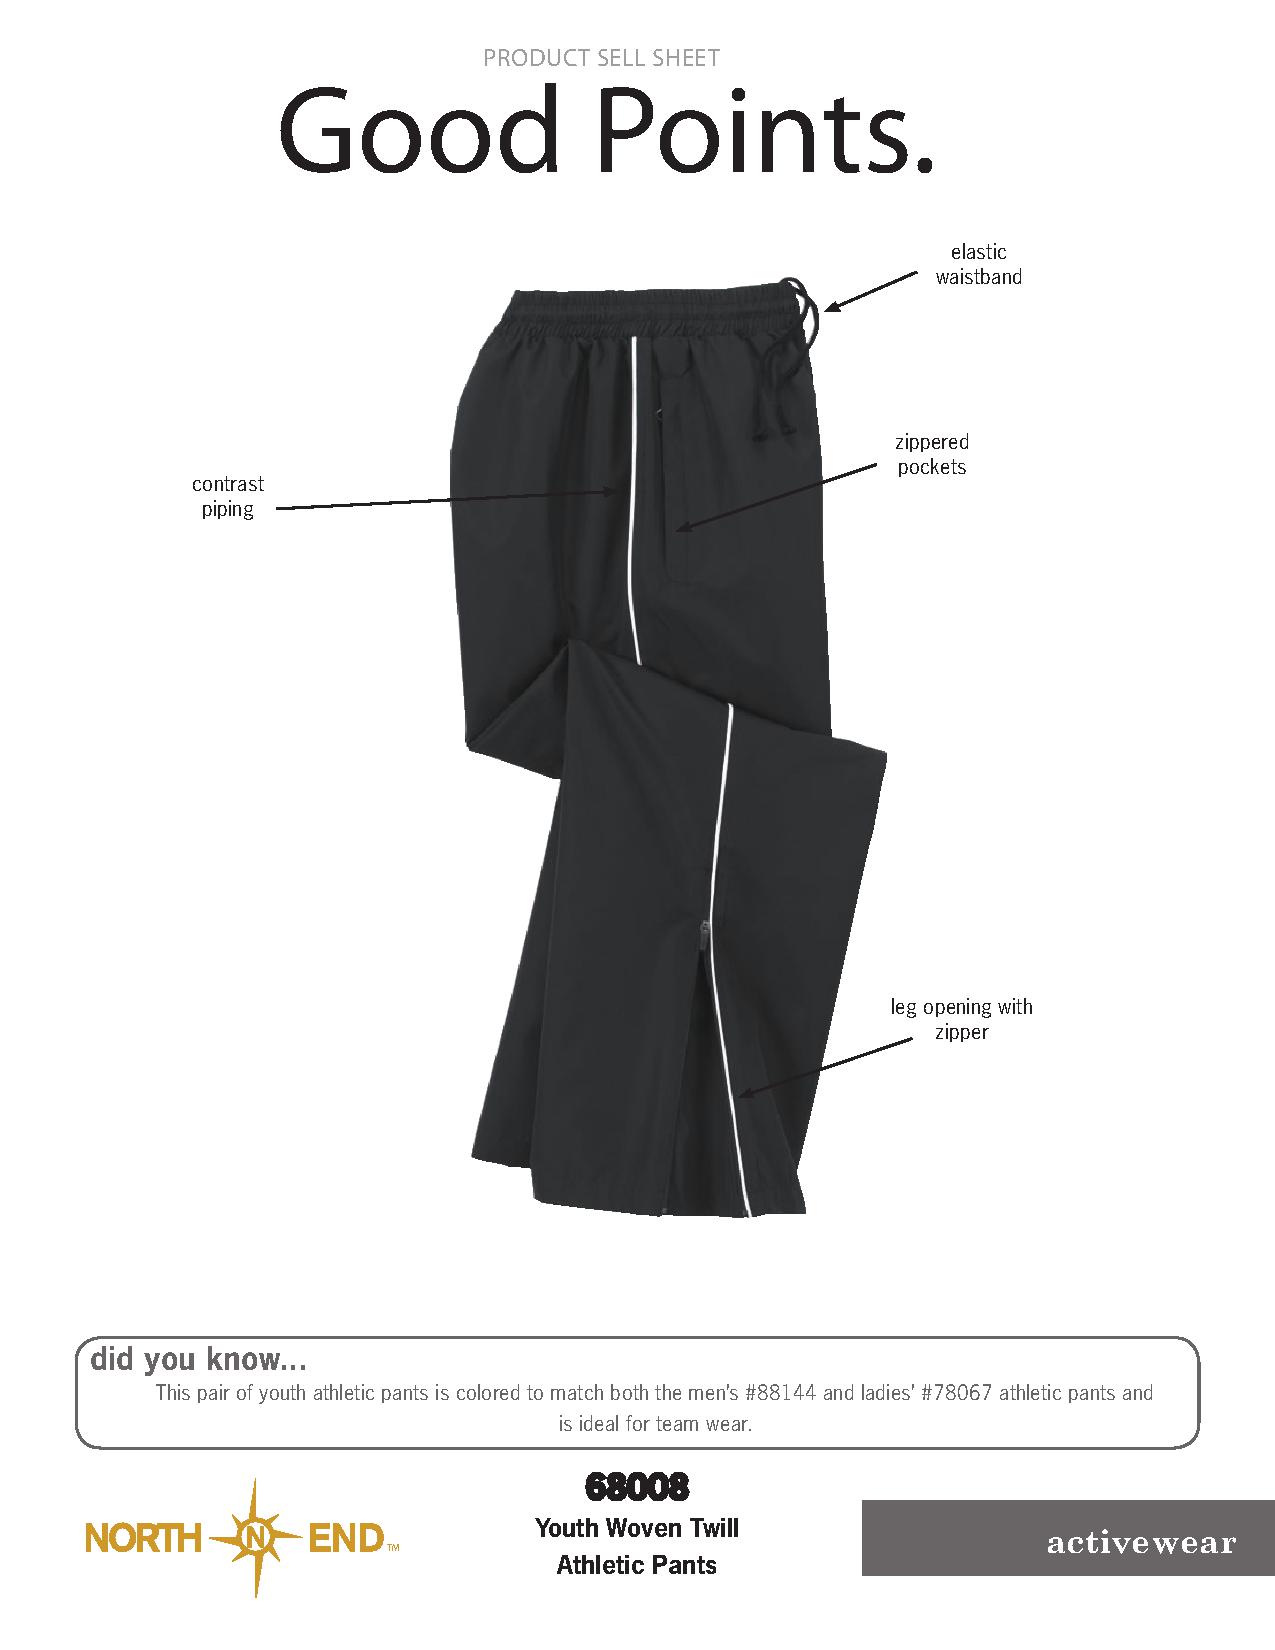 Ash City Lifestyle Athletic Separates 68008 - Youth Woven Twill Athletic Pants